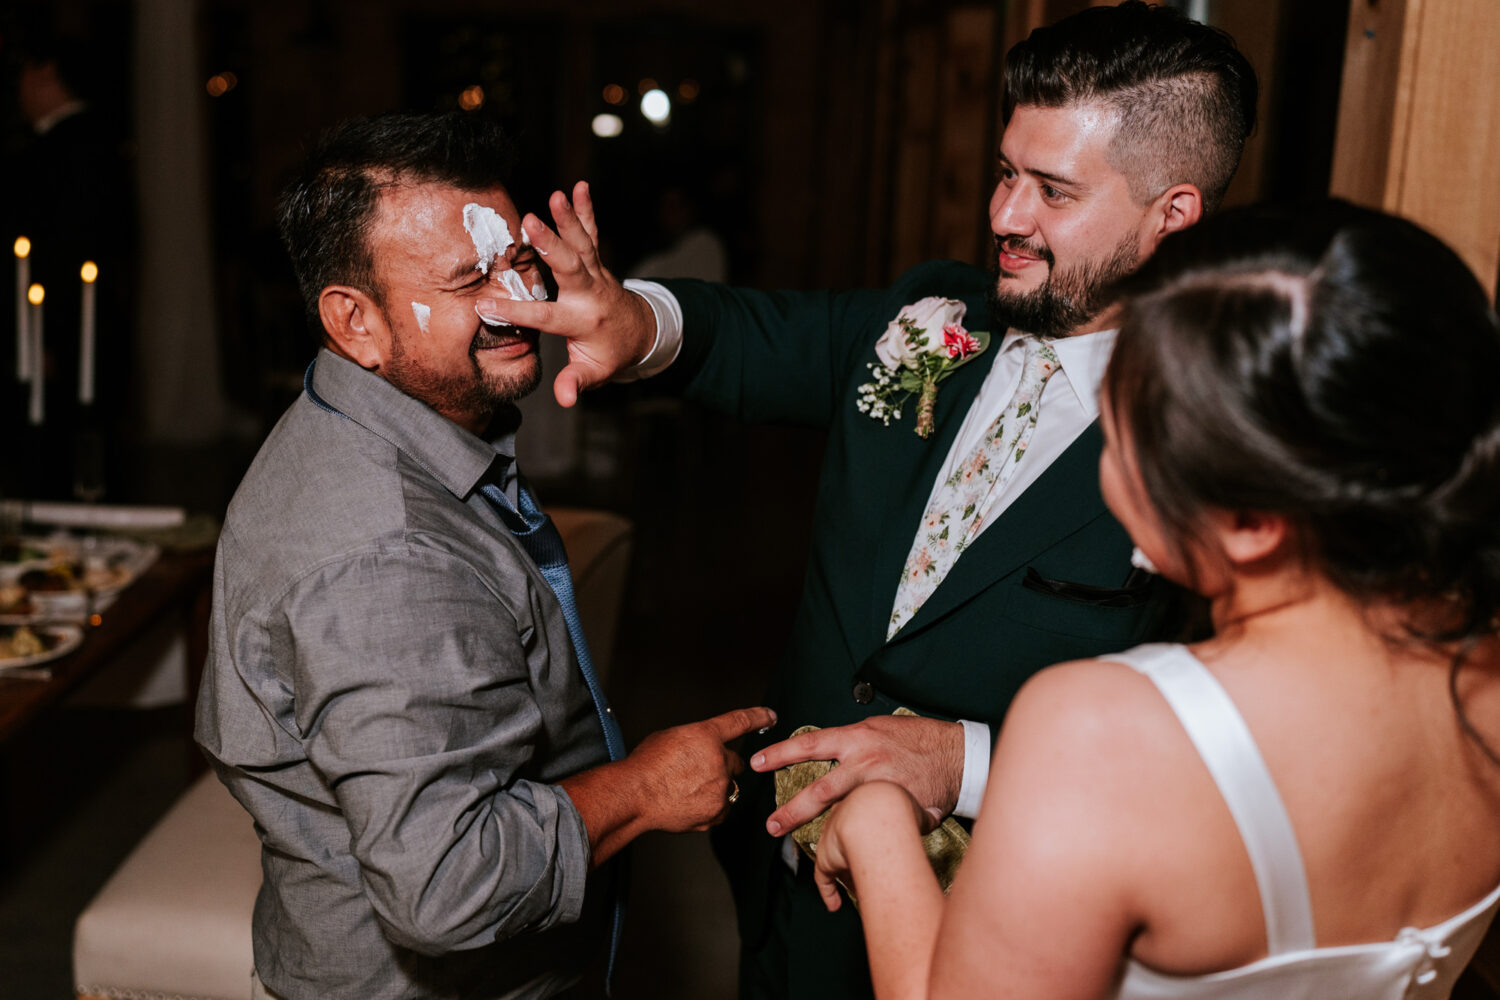 uncle of the groom and the groom out cake on each others faces